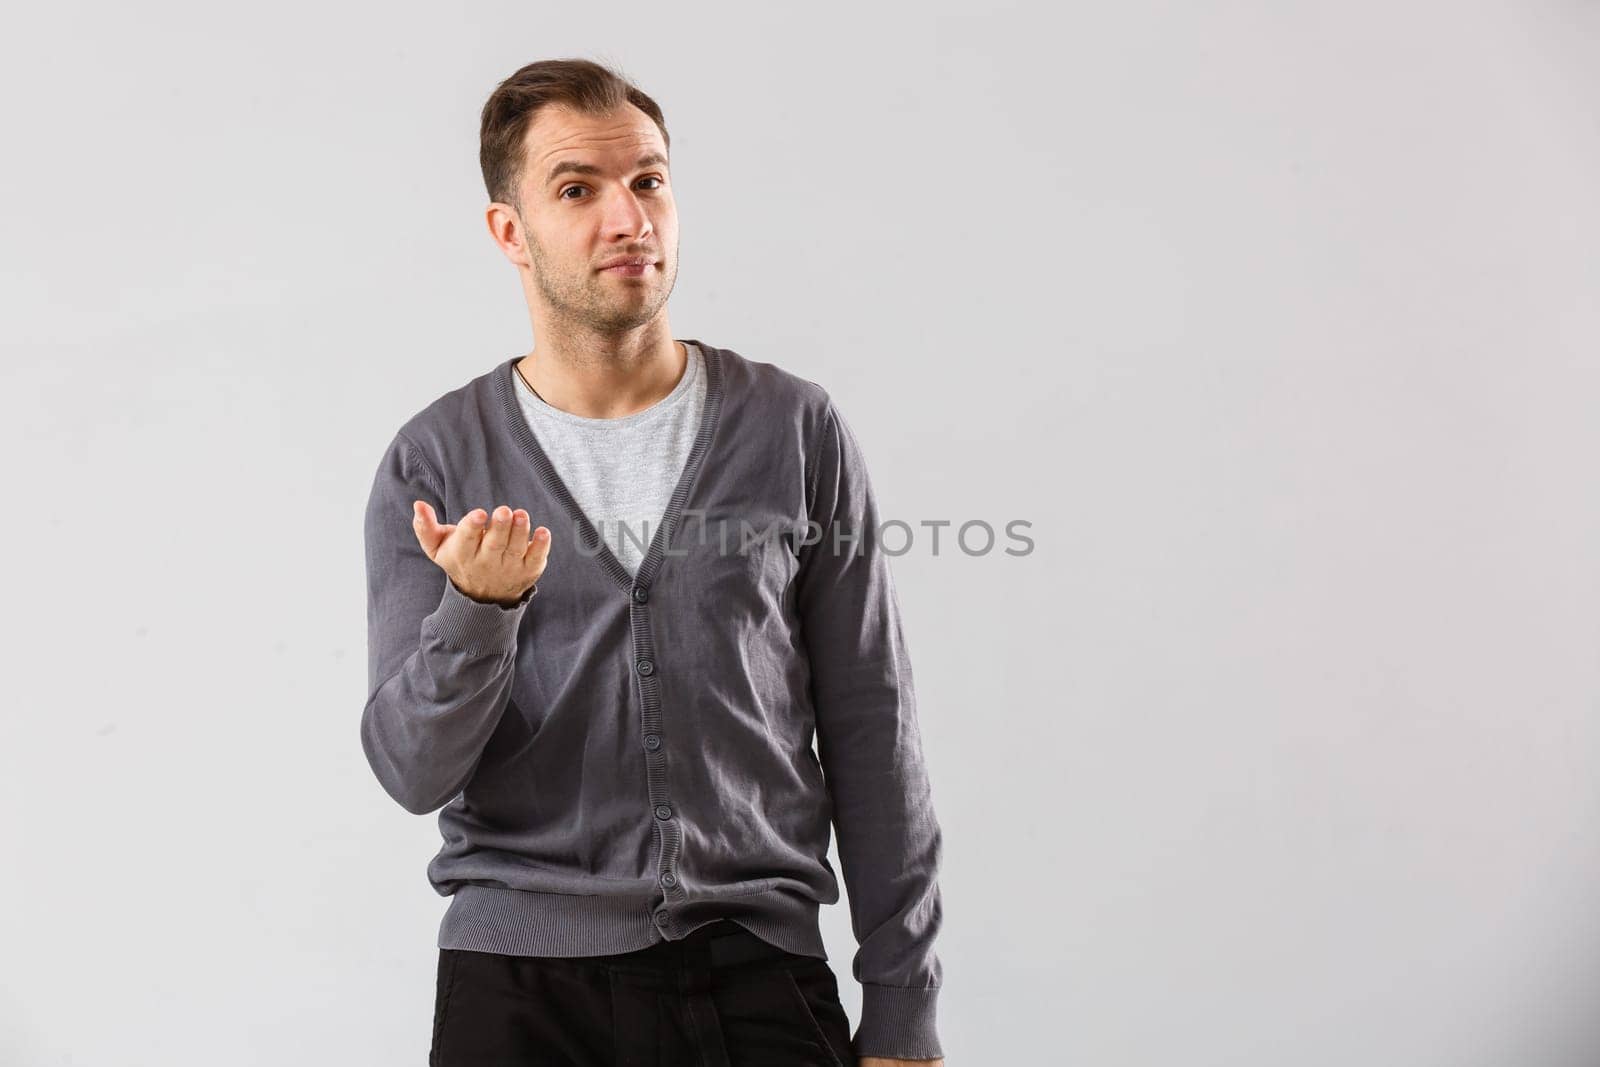 Confident and stylish. young man and looking at camera while standing against white background.